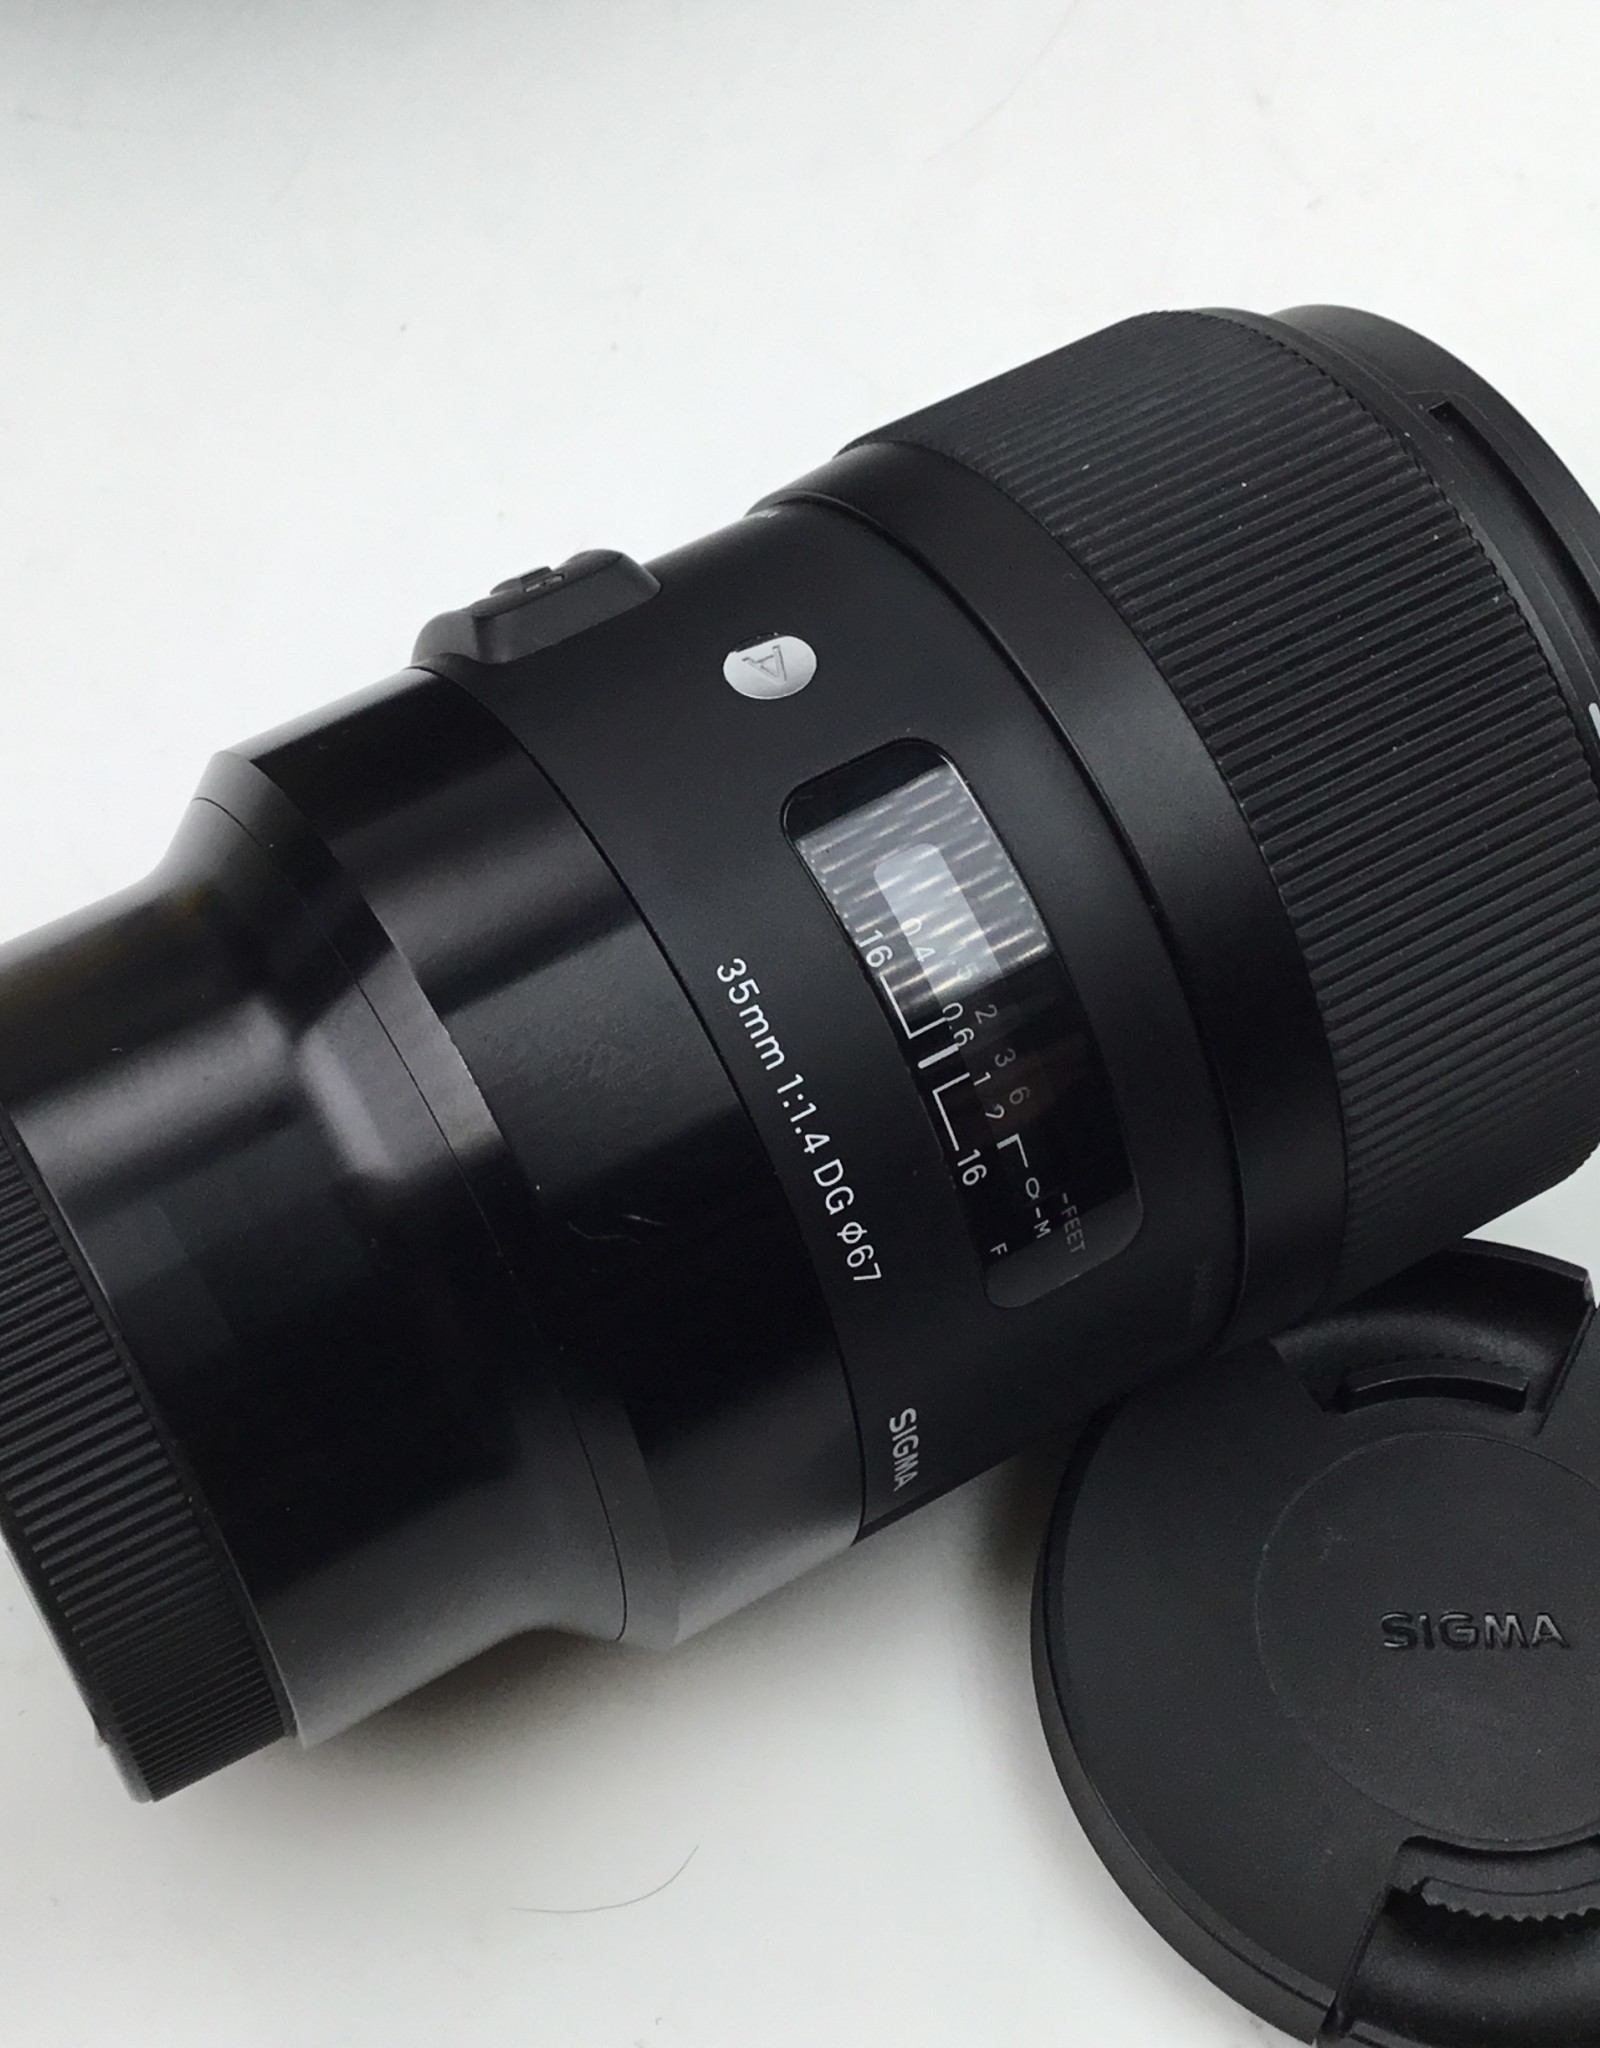 SONY Sigma 35mm f1.4 DG Art Lens for Sony Used Good